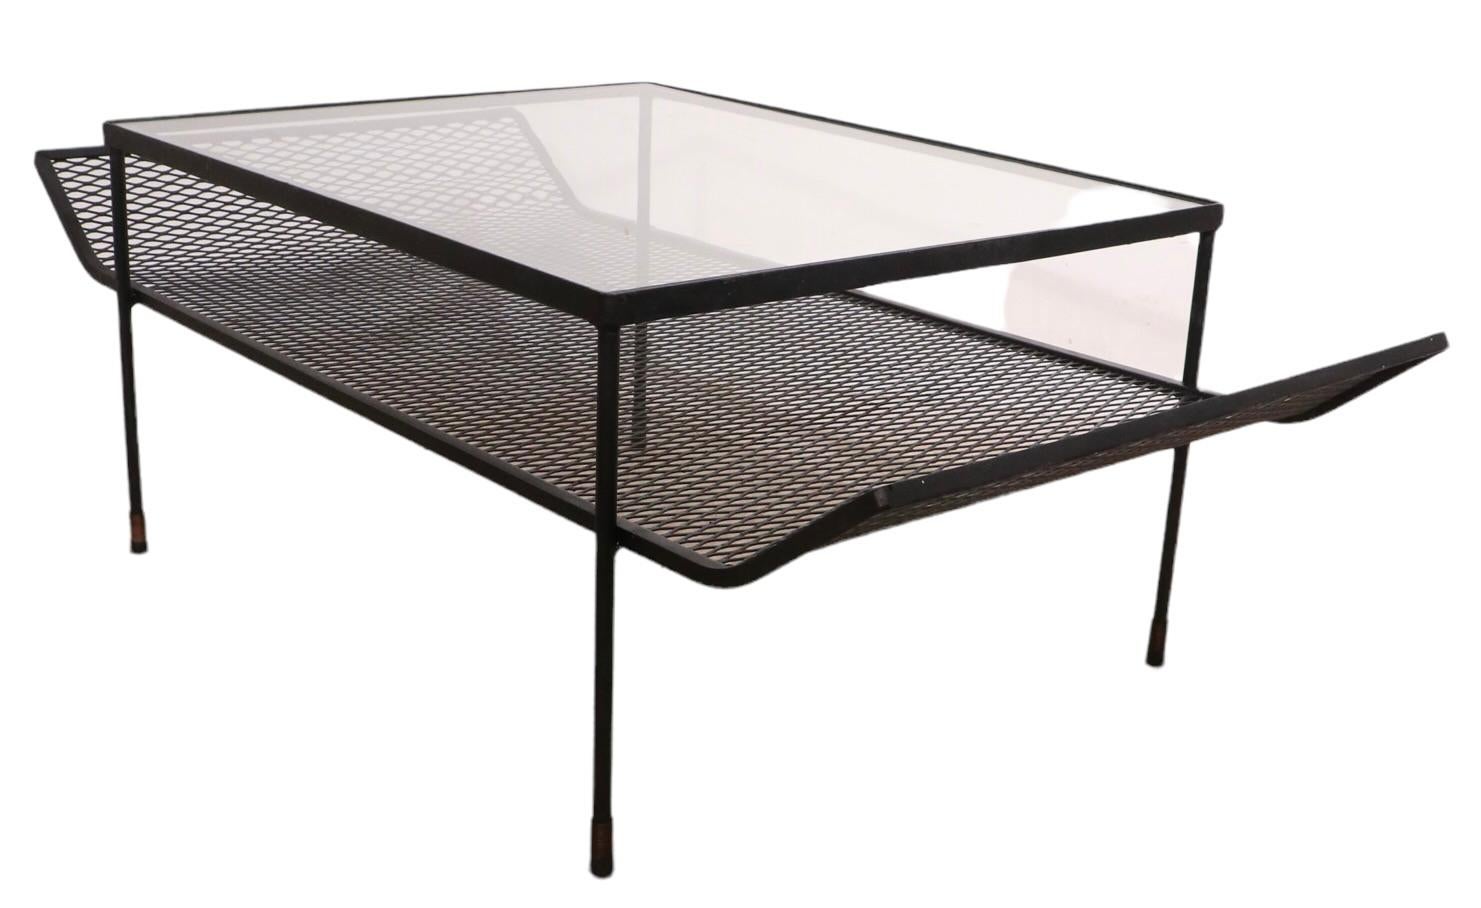  Architectural Mid-Century Wrought Iron and Glass Coffee Table Att. to Woodard  For Sale 1